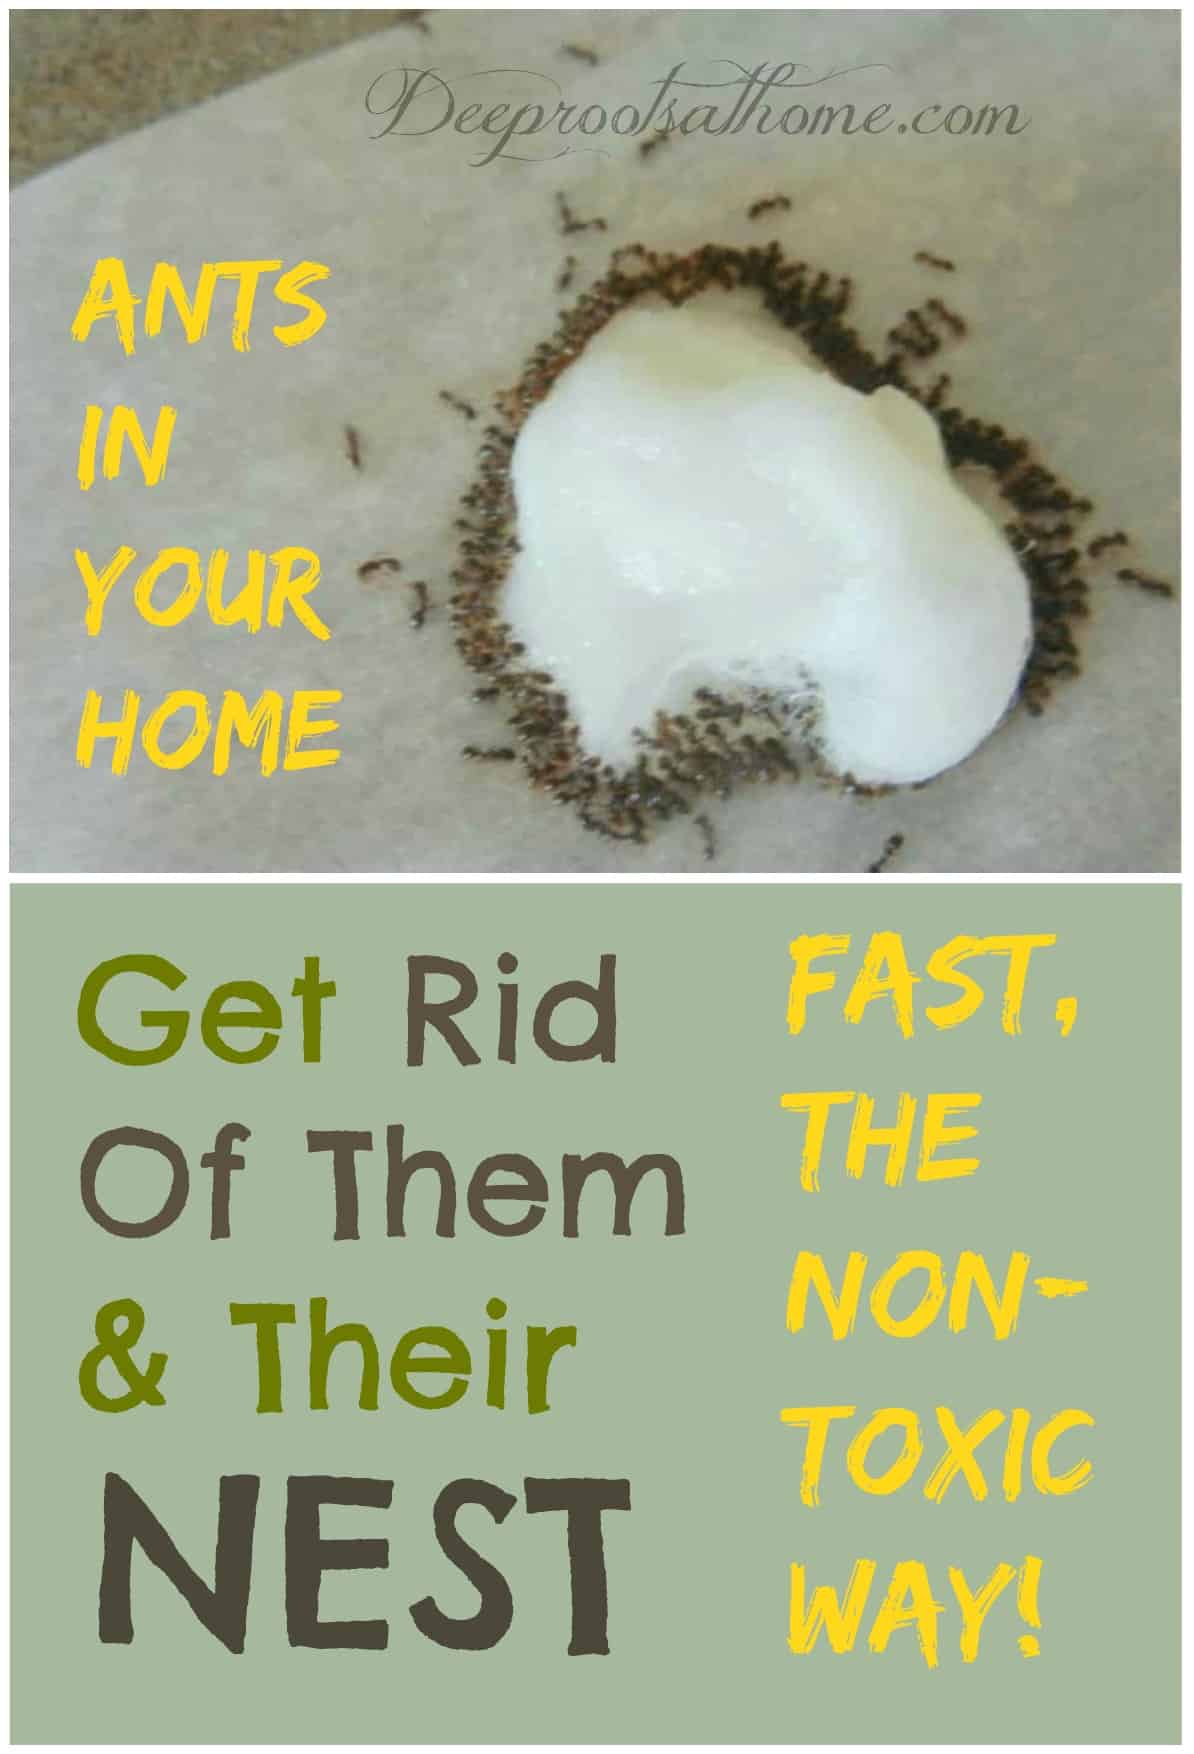 Ants: Get Rid Of Them & Their Nest Fast, The Non-Toxic Way